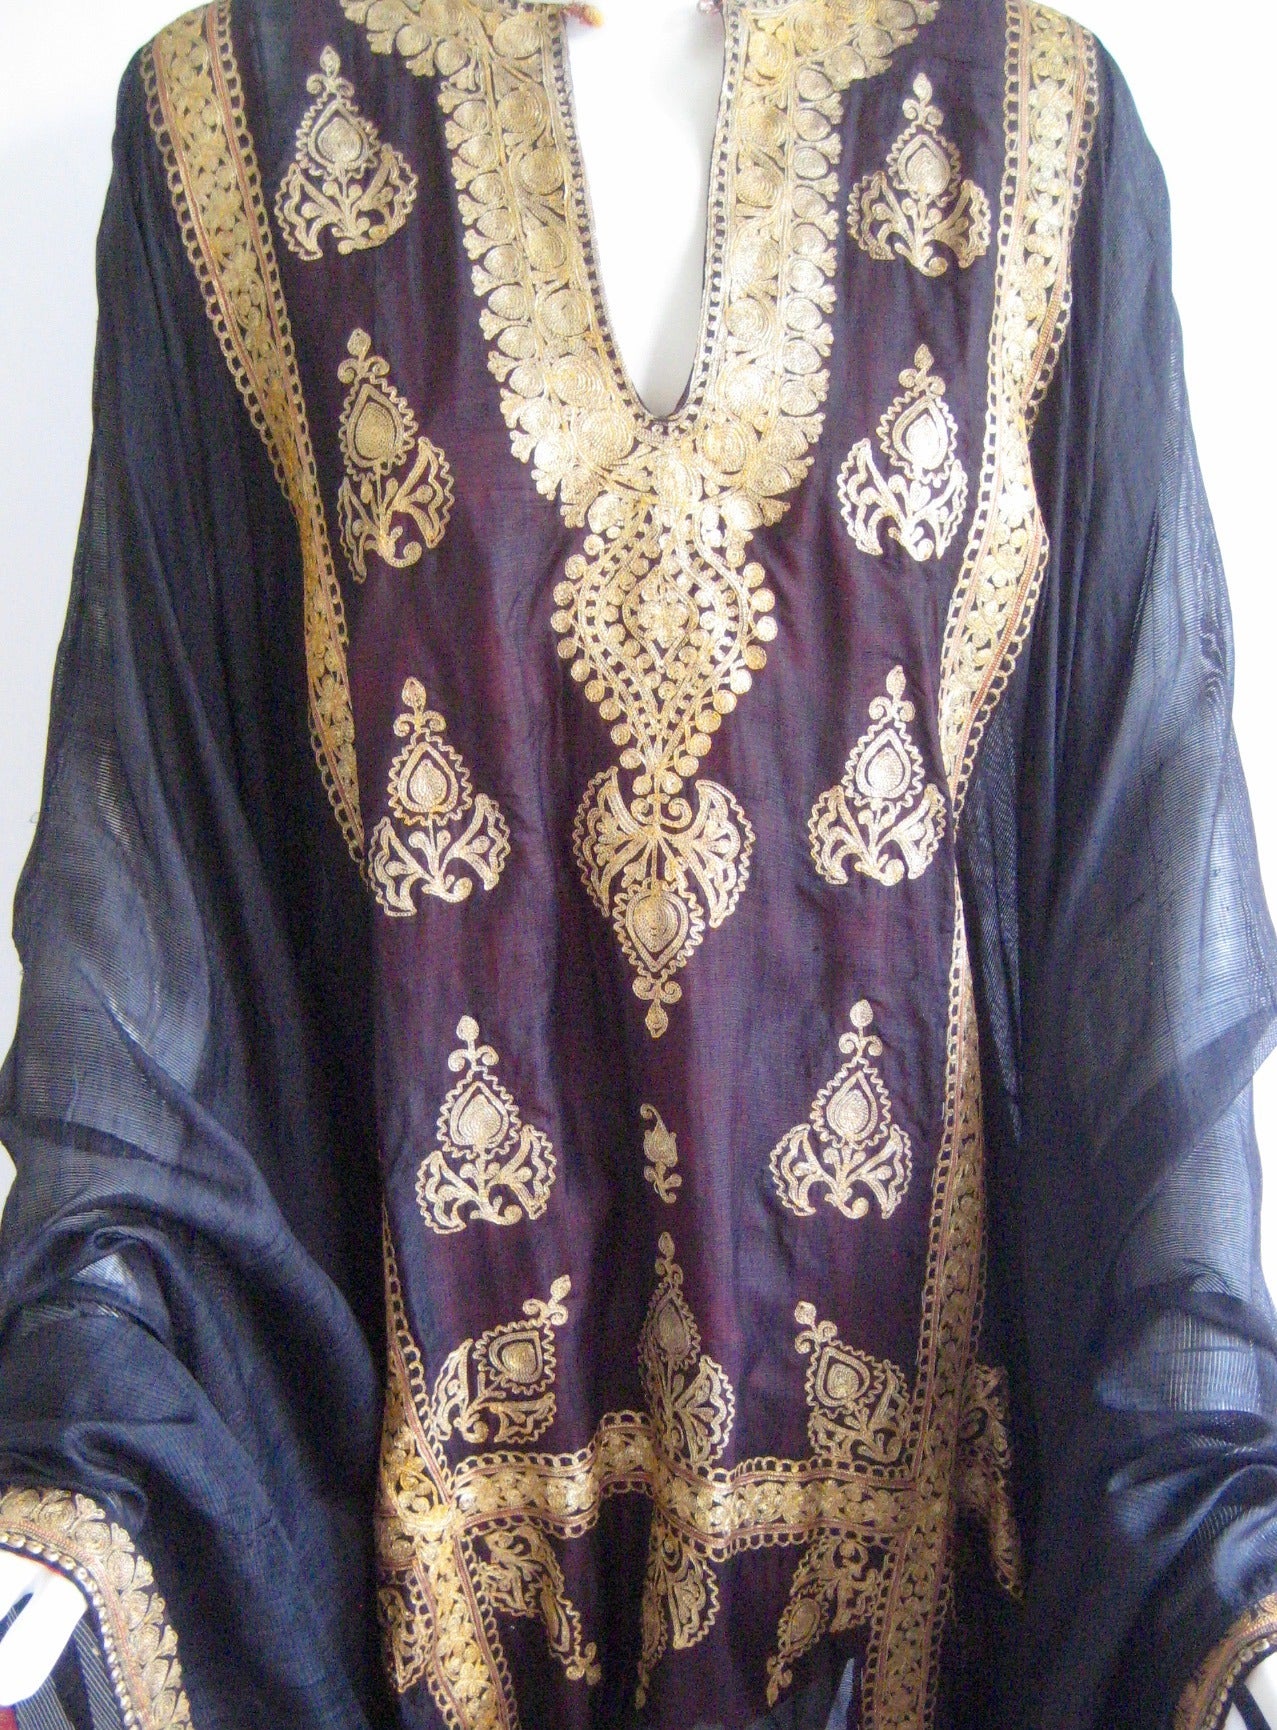 Amazing Middle Eastern Caftan .I believe this originally came from the Bahrain Islands.It was de accessioned at auction from a history museum and looks as it was worn very little if at all .
Made from very fine woven striped silk this has gold